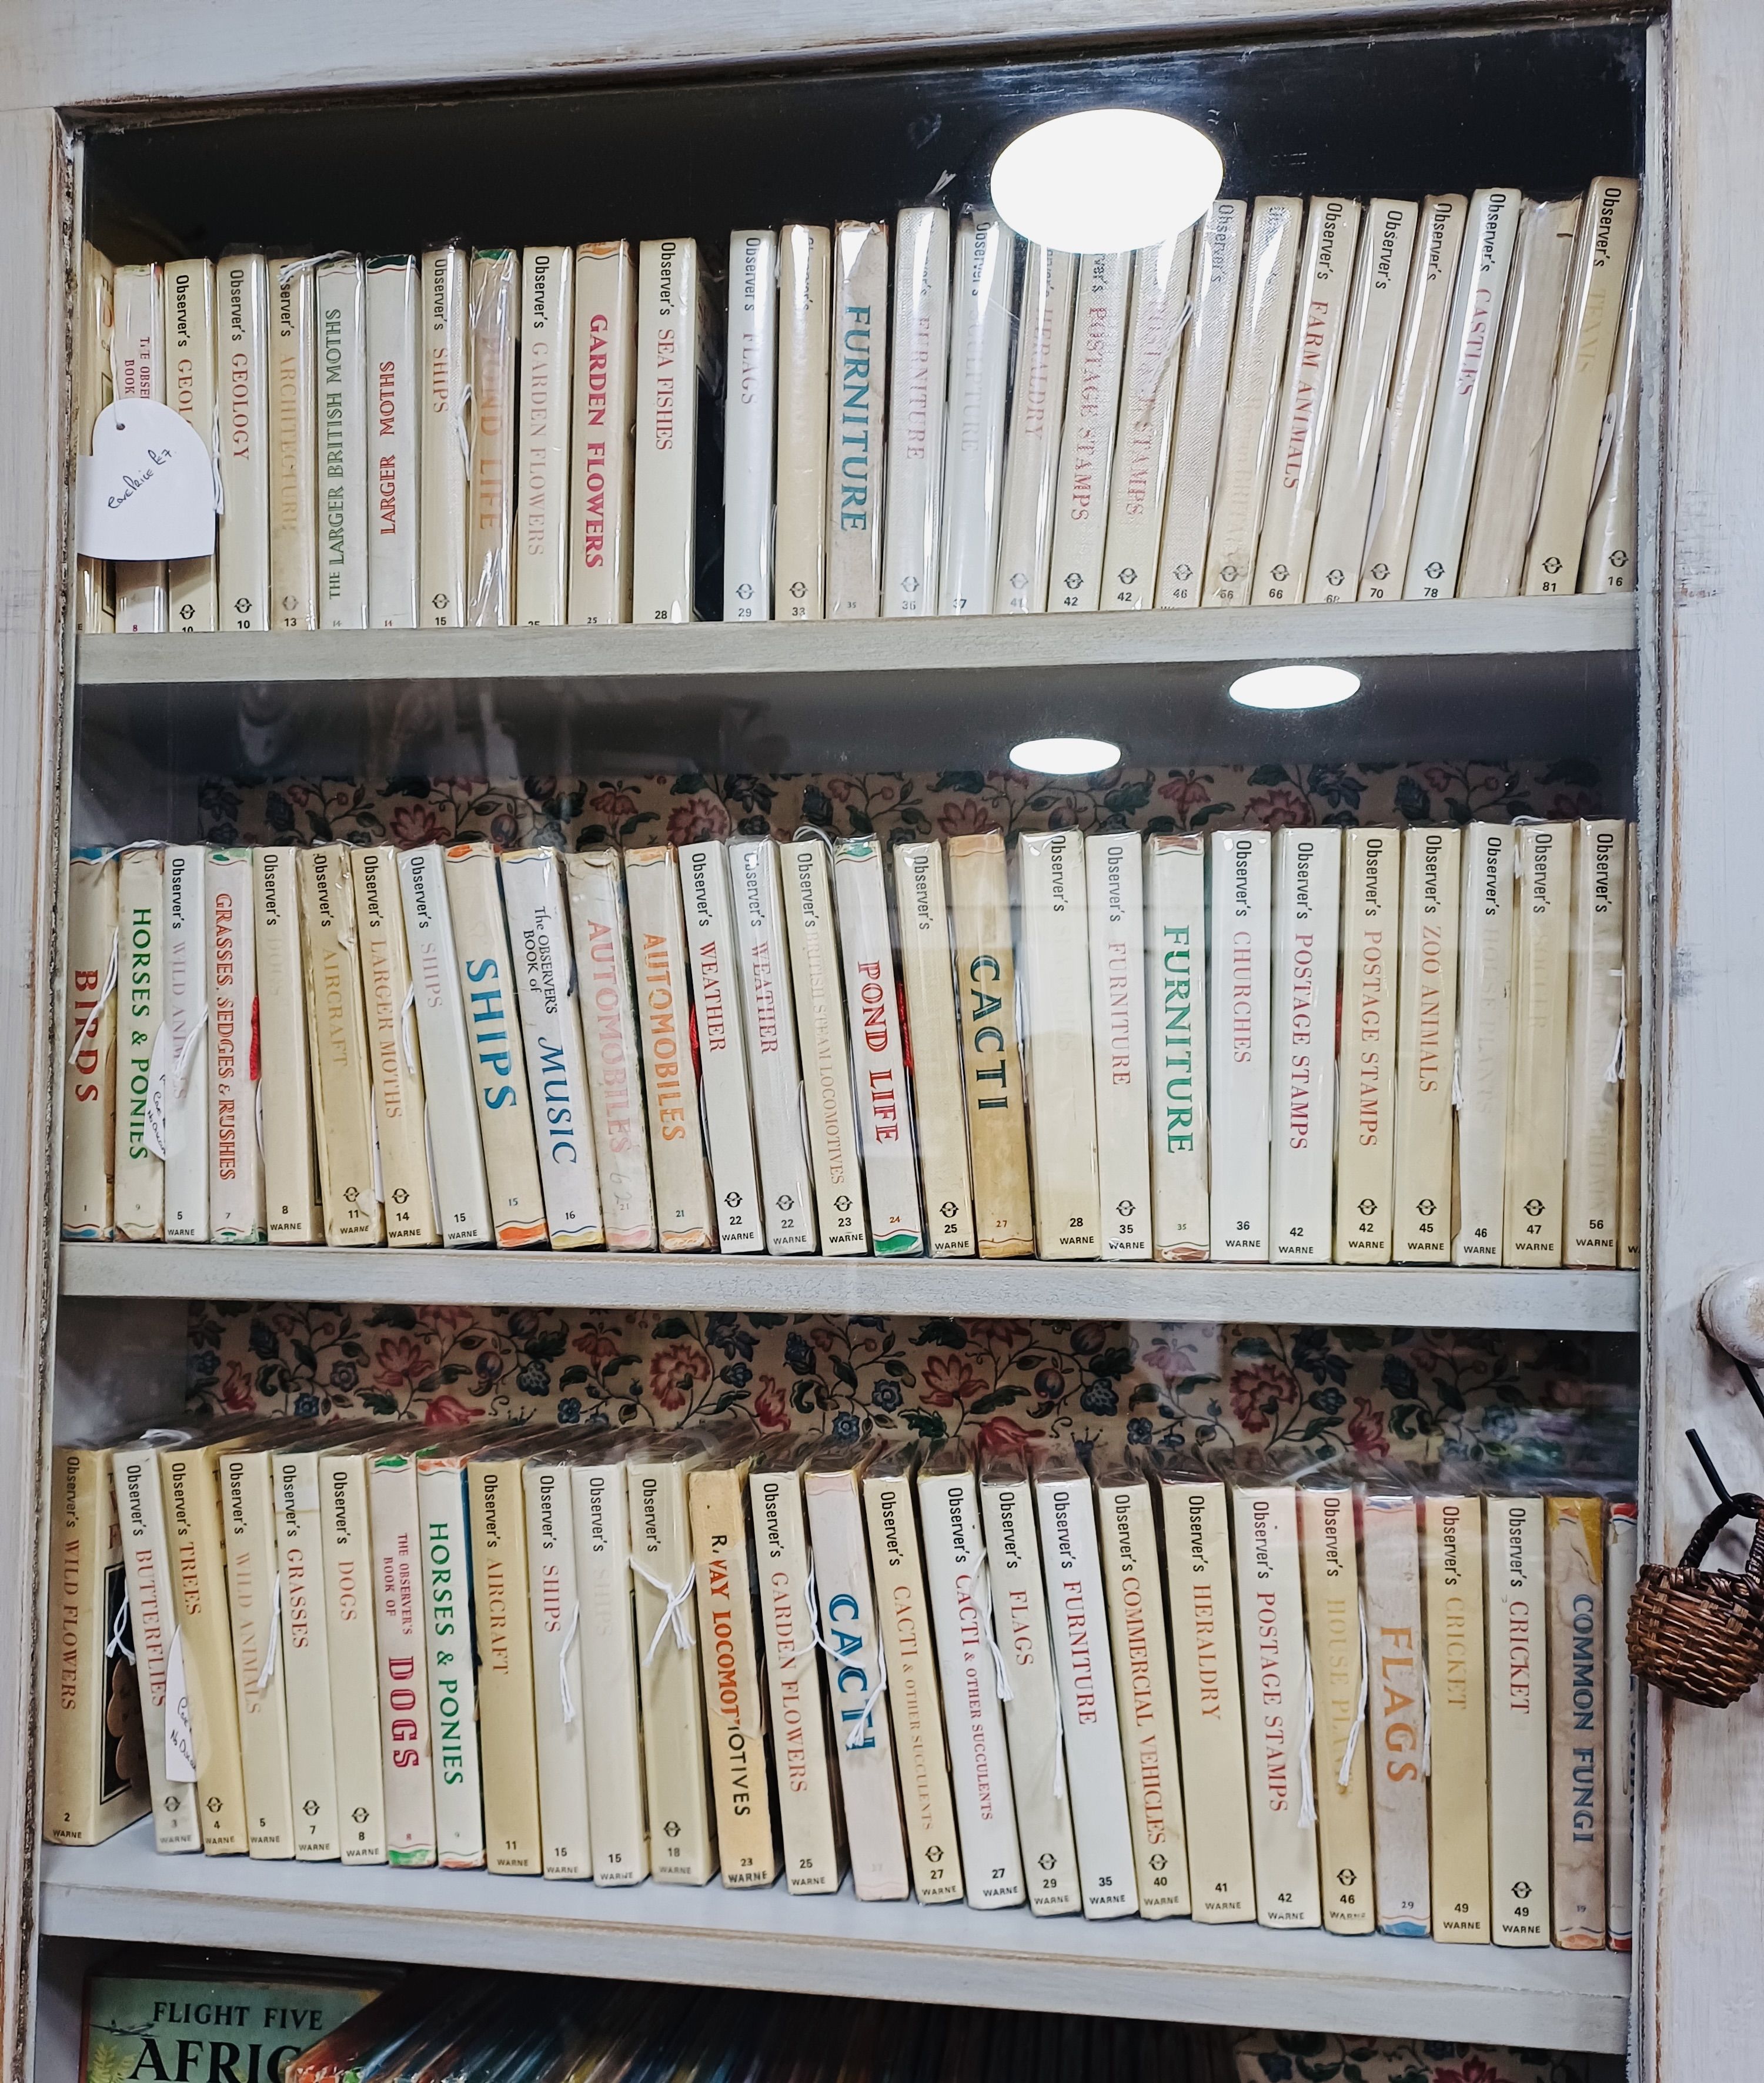 LITTLE LIBRARY: The Observer books were a treasure trove of knowledge before the internet